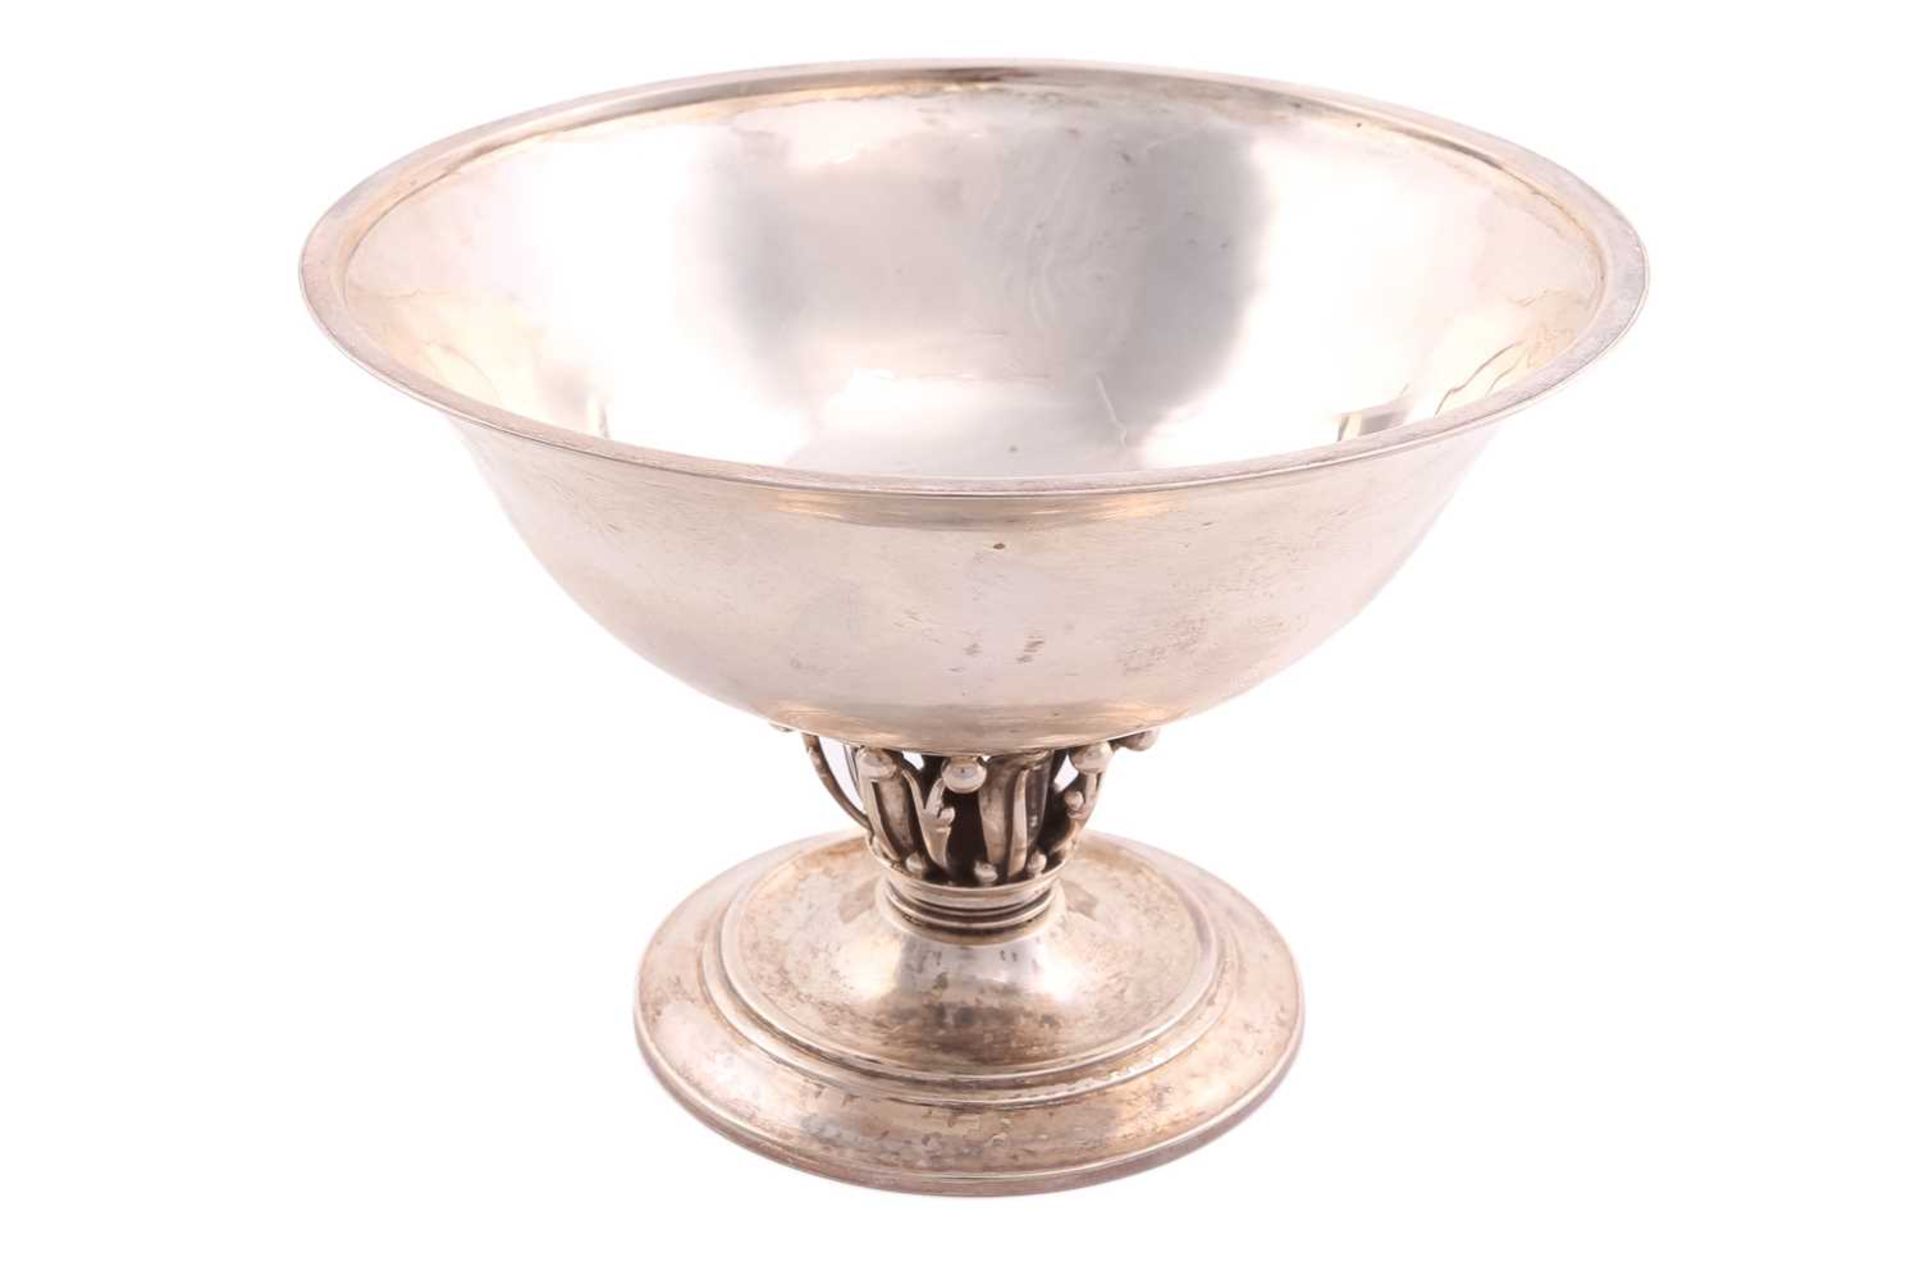 Georg Jensen - a footed dish with flared rim, after the design of 'Louvre Bowl', supported with - Image 2 of 3